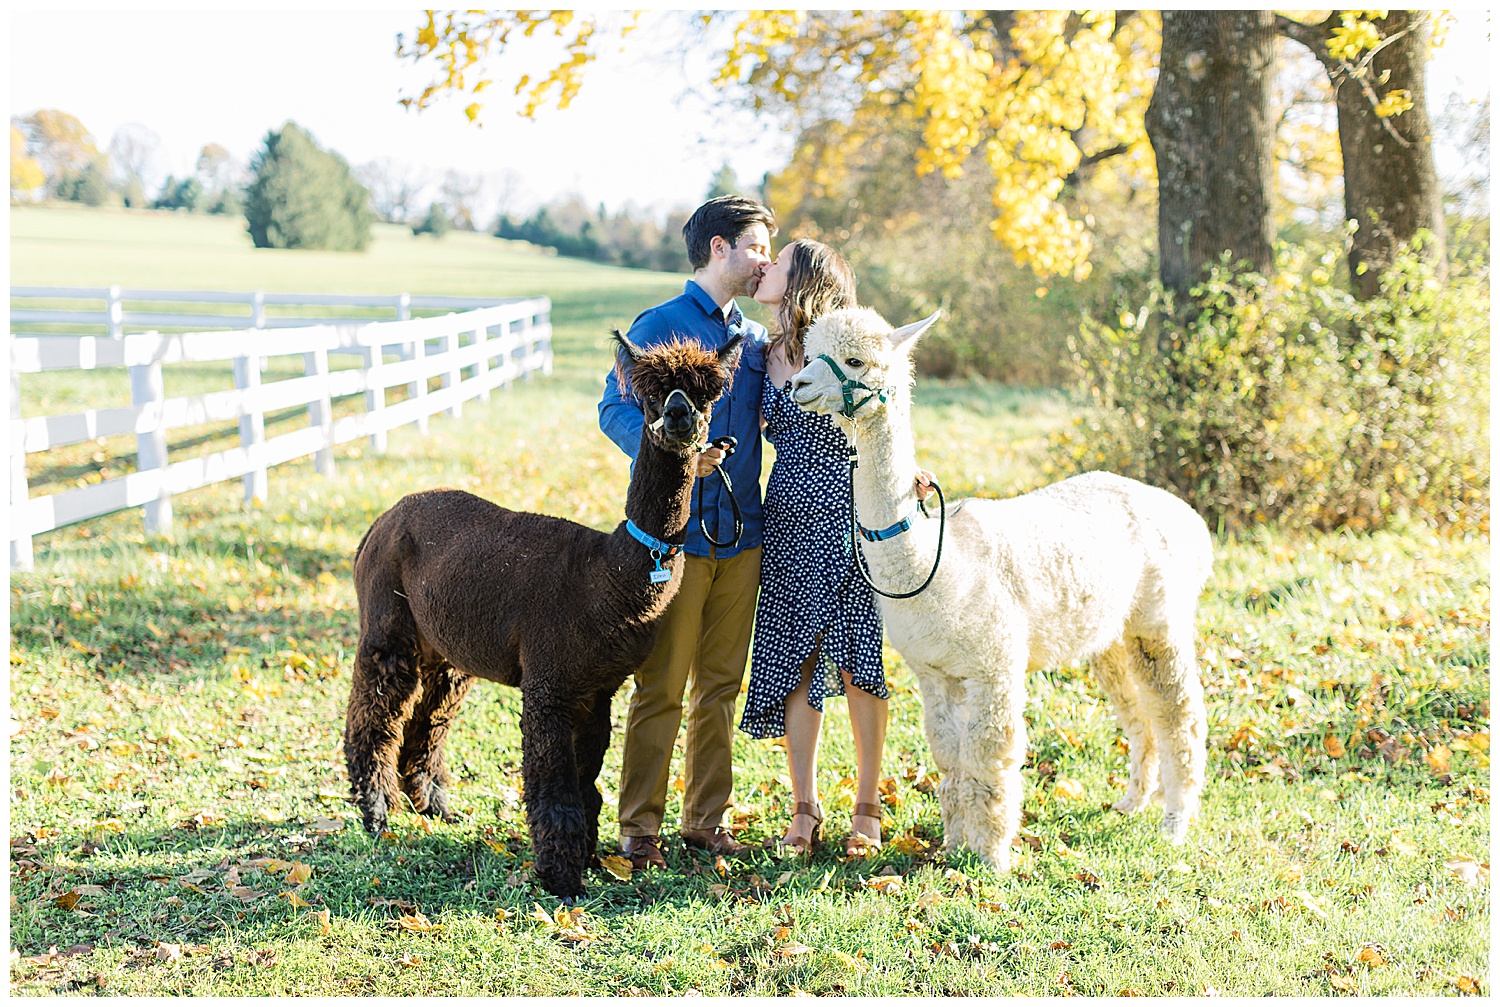 landscape portrait of the couple sharing a kiss with their favorite brown and white alpacas by their sides by film photographer AGS Photo Art